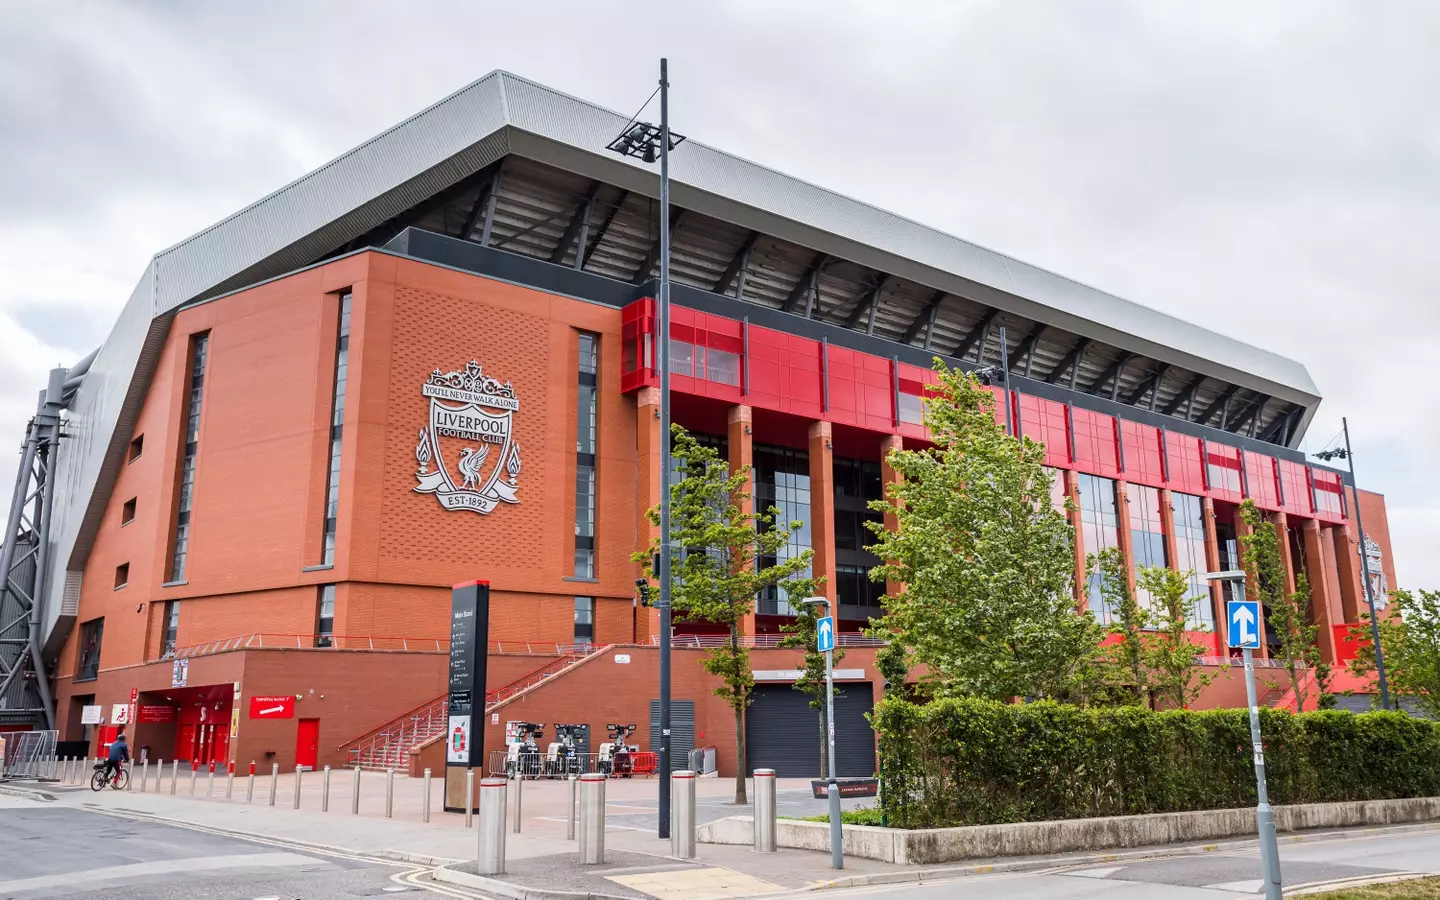 FSG have invested heavily into the redevelopment of Anfield. (Image